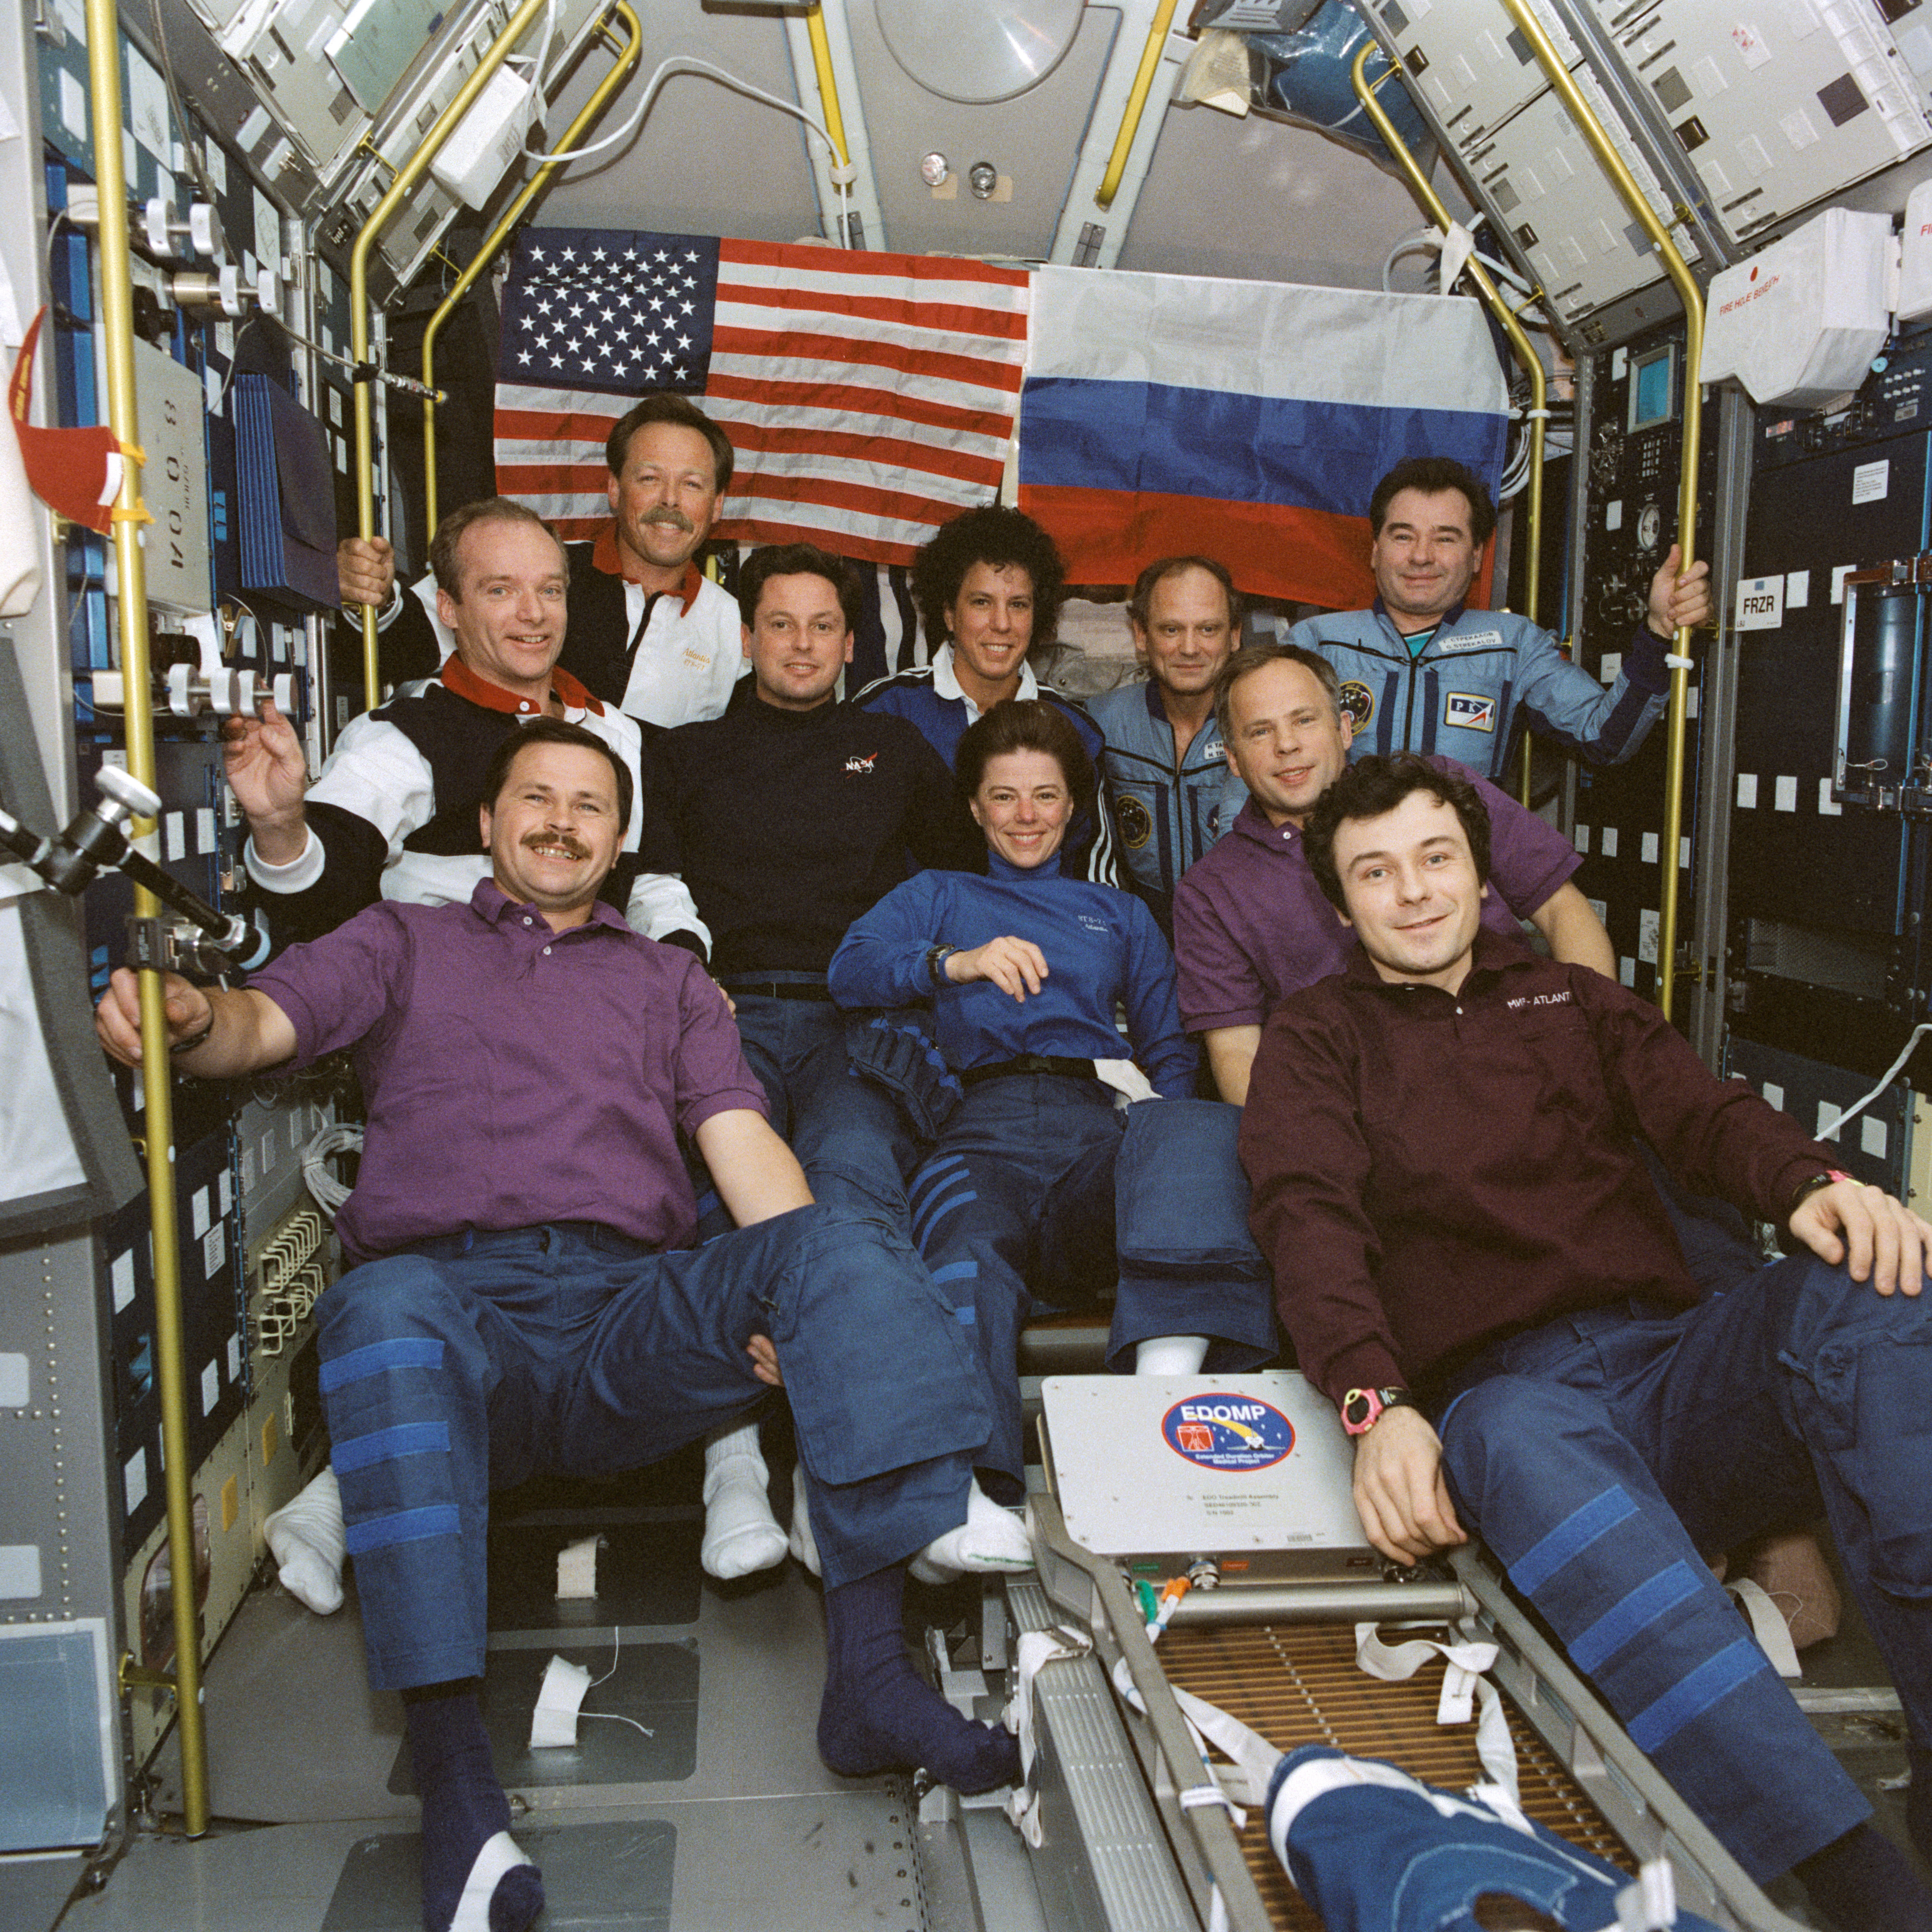 The international STS-71 crew in July 1995